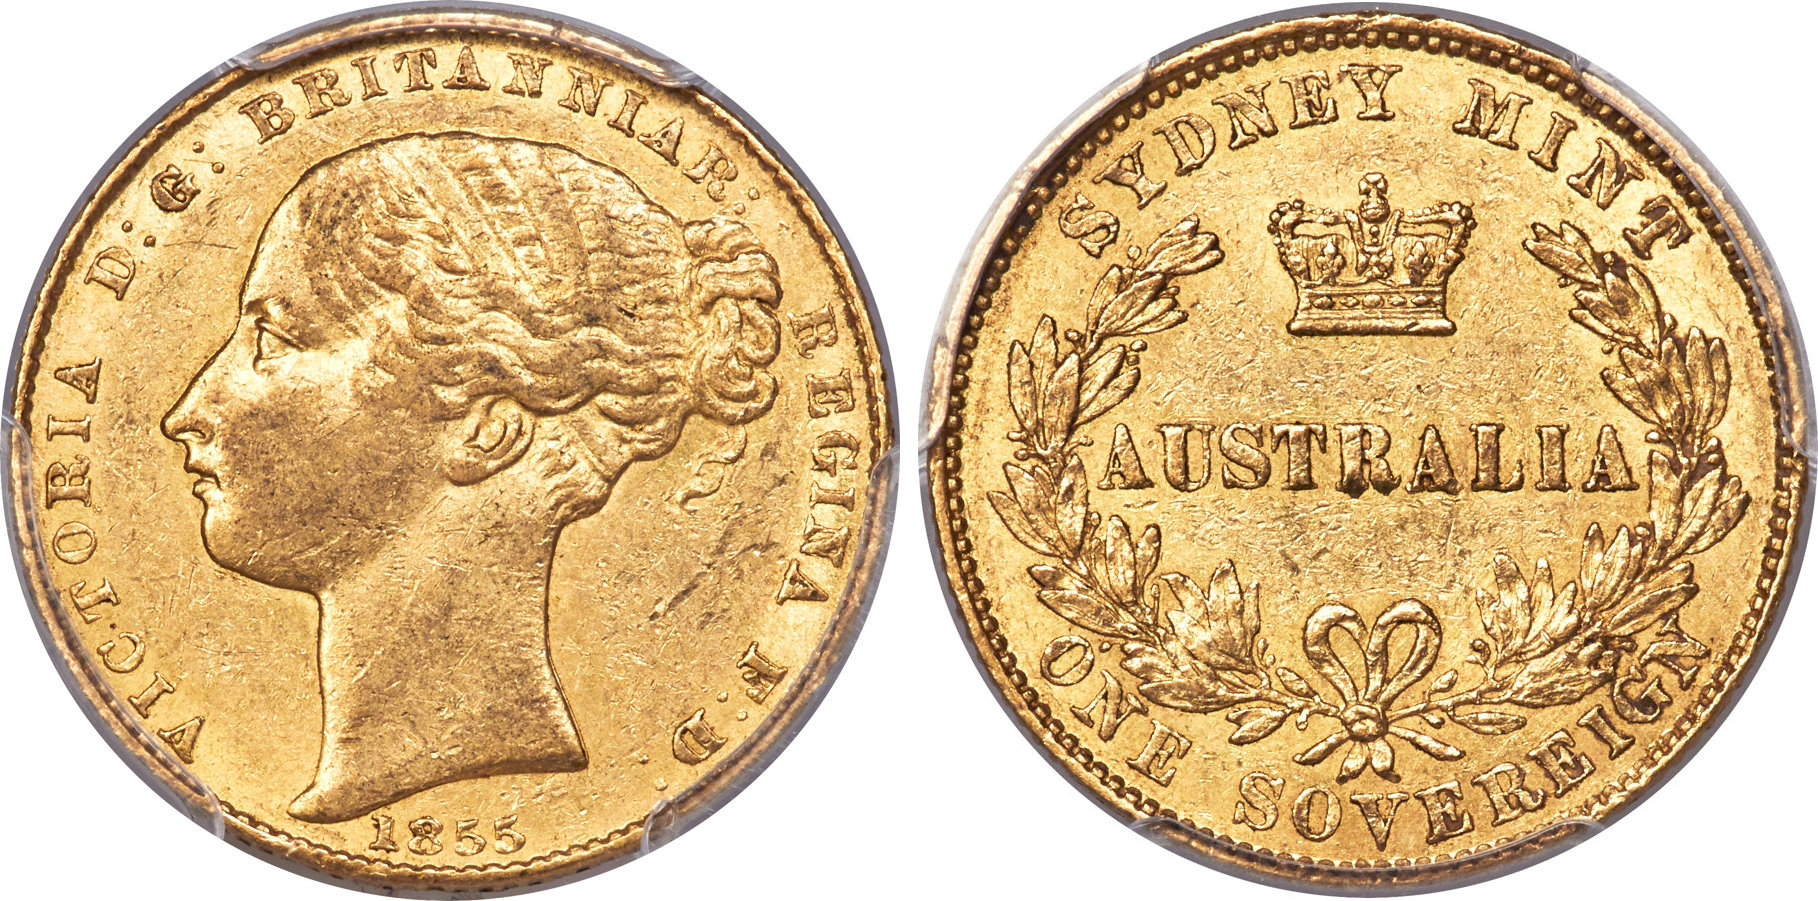 Australia 1951 Gold Plated Federation Florin Coin Pack